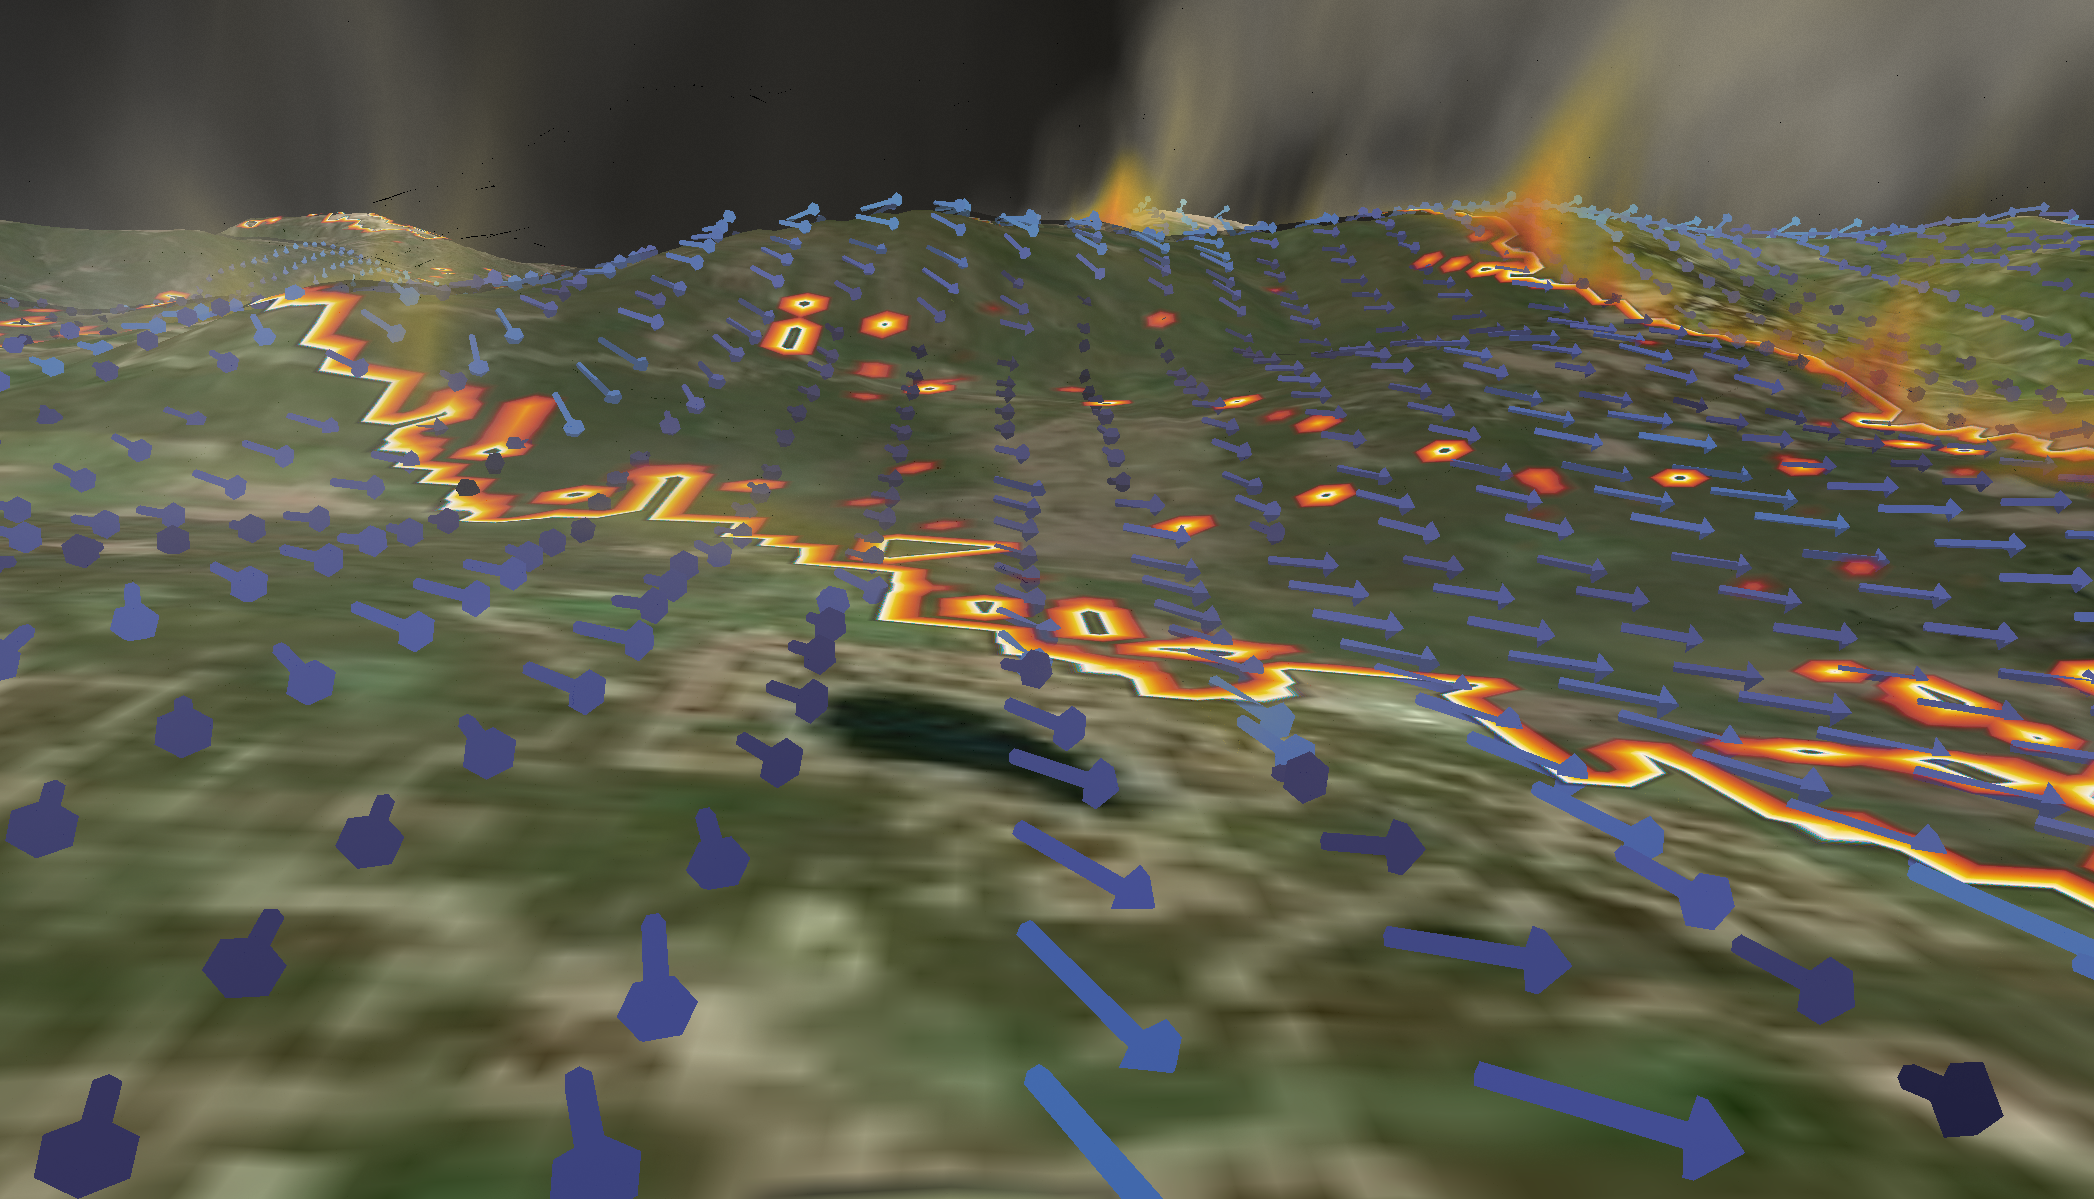 VAPOR visualization of the East Troublesome fire in 2020 from a Grand Lake, Colorado, perspective.